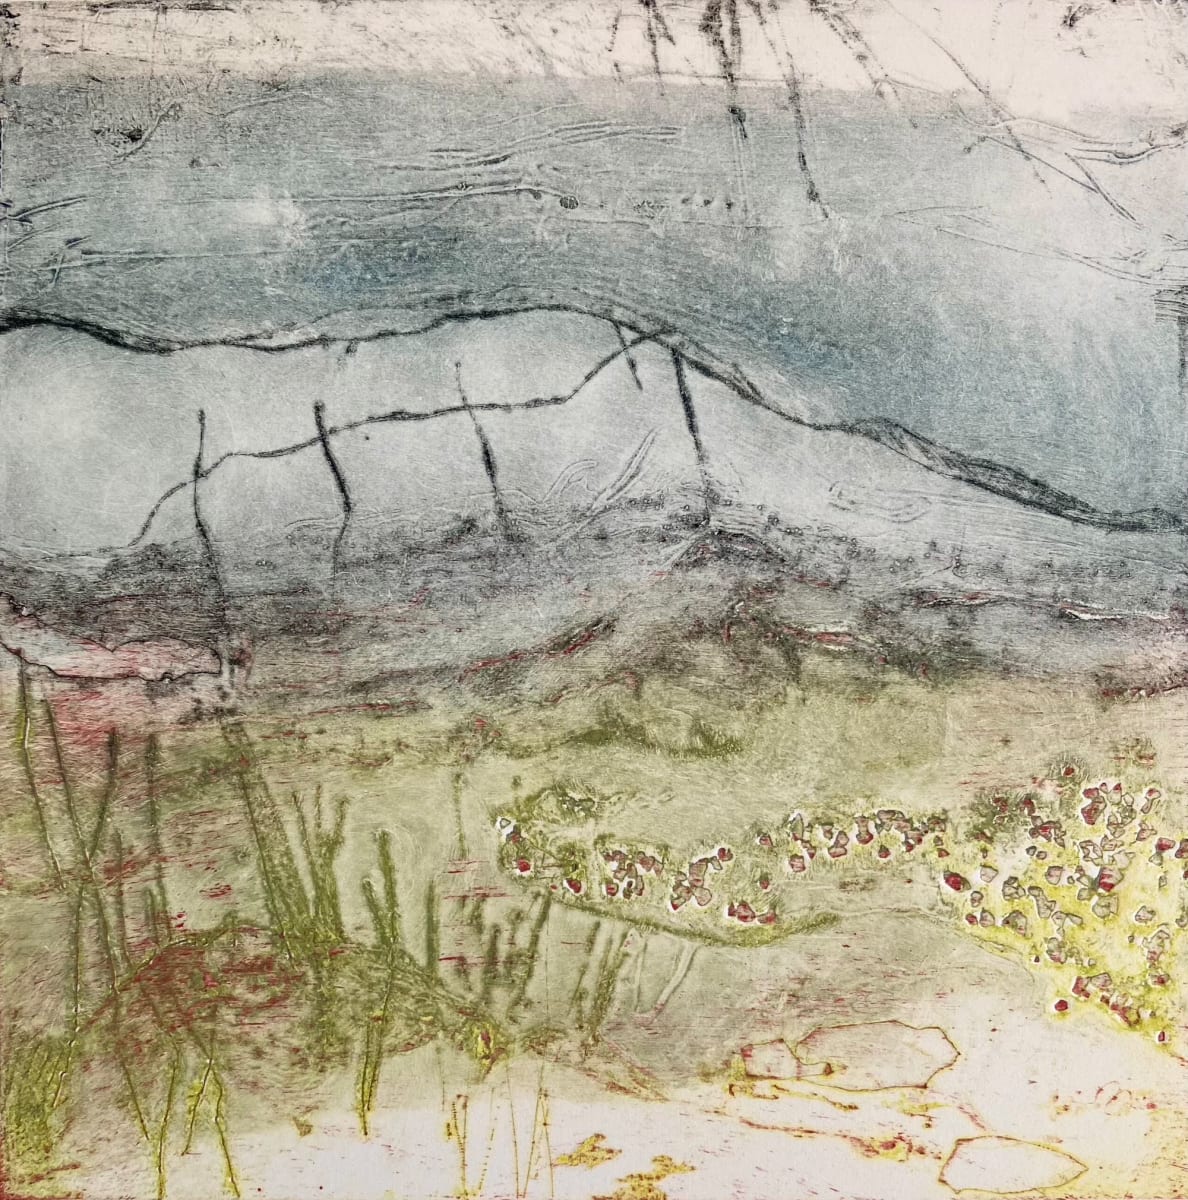 Solitary Peace  OEV4 by Victoria Johns Art  Image: Collagraph Original Hand Pulled Print (Open Edition Varied).  Abstract Landscape. Framed in Wood.